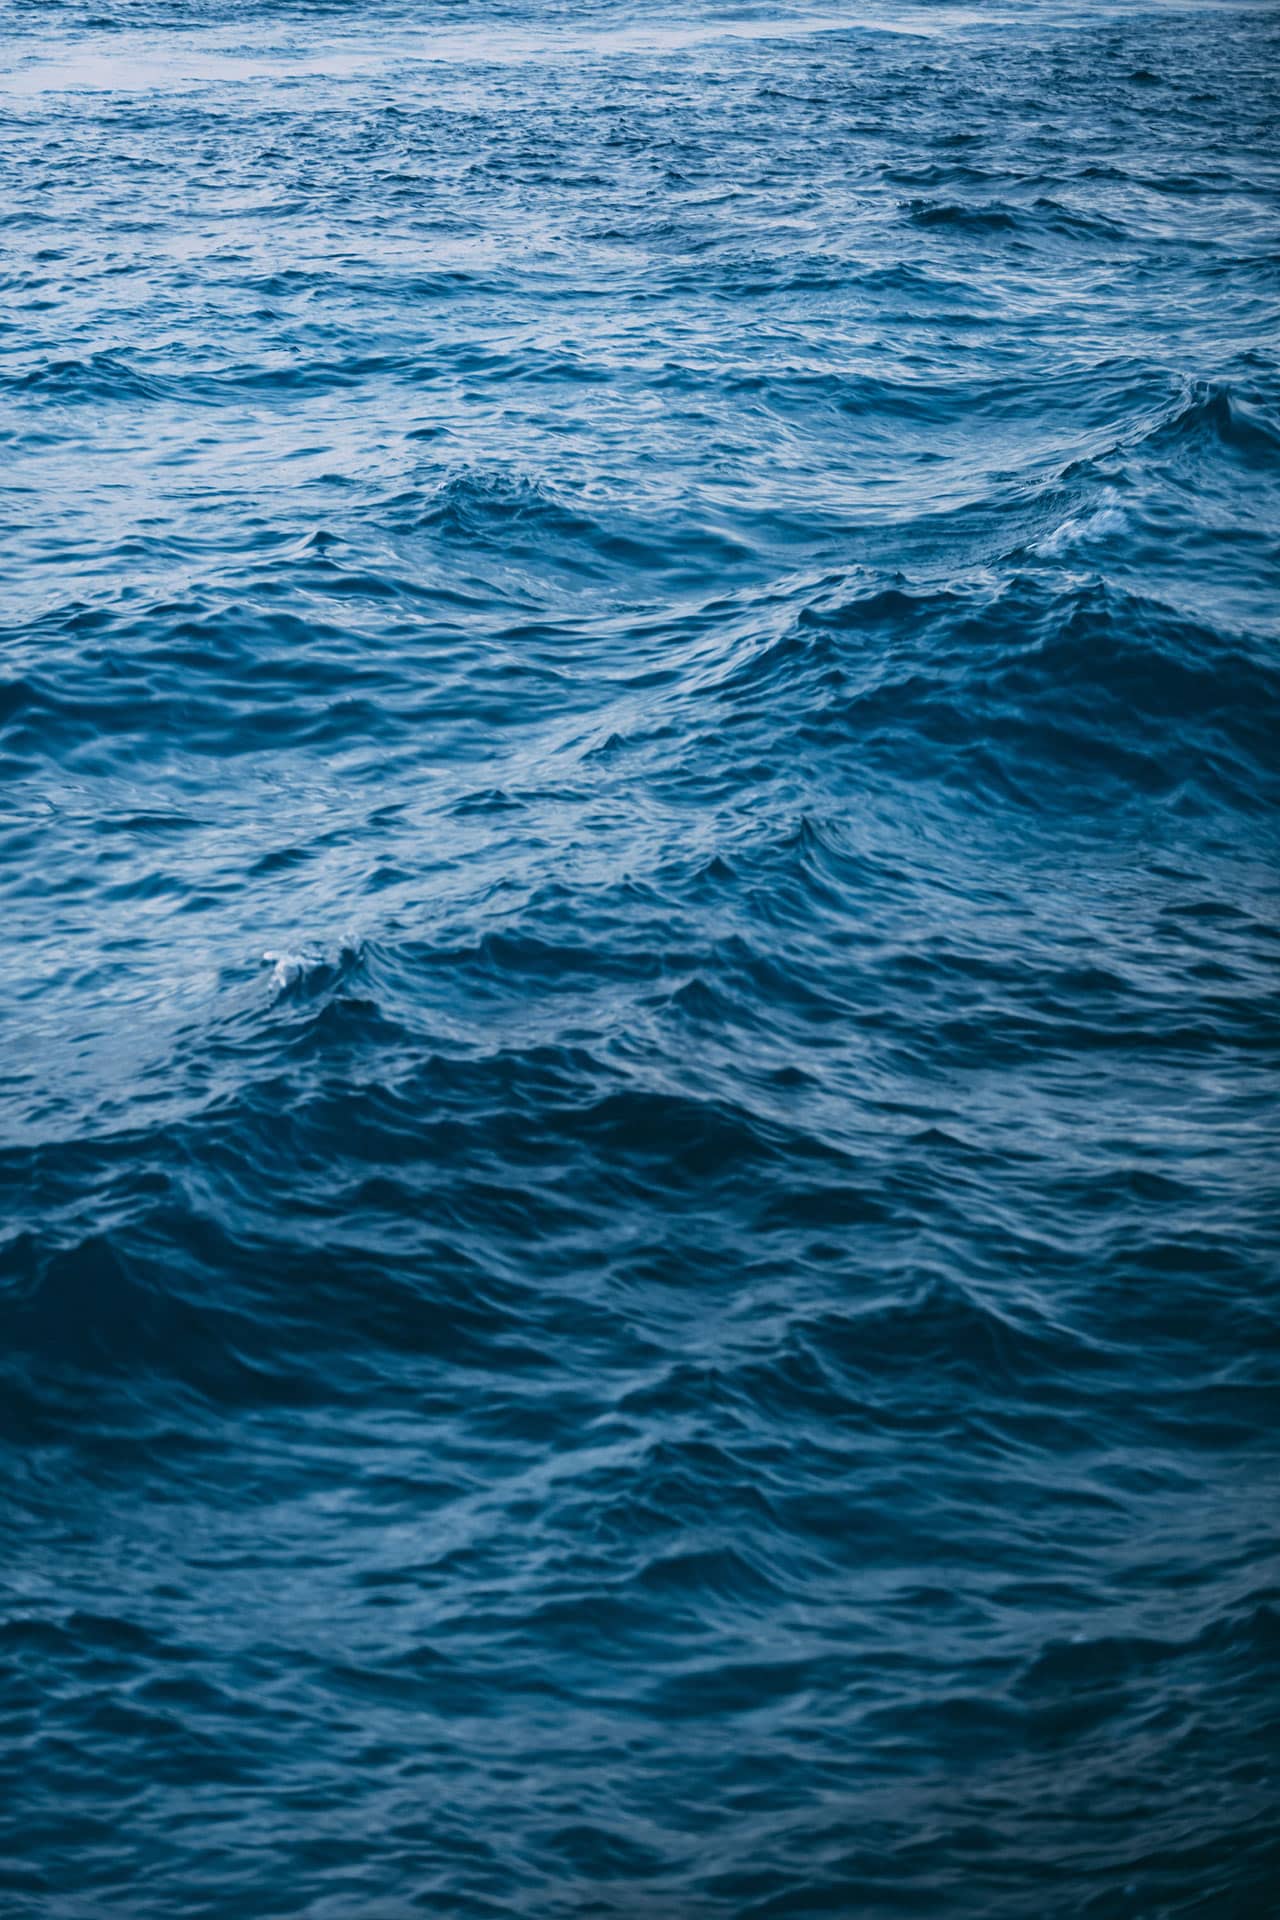 The water in the sea with some waves